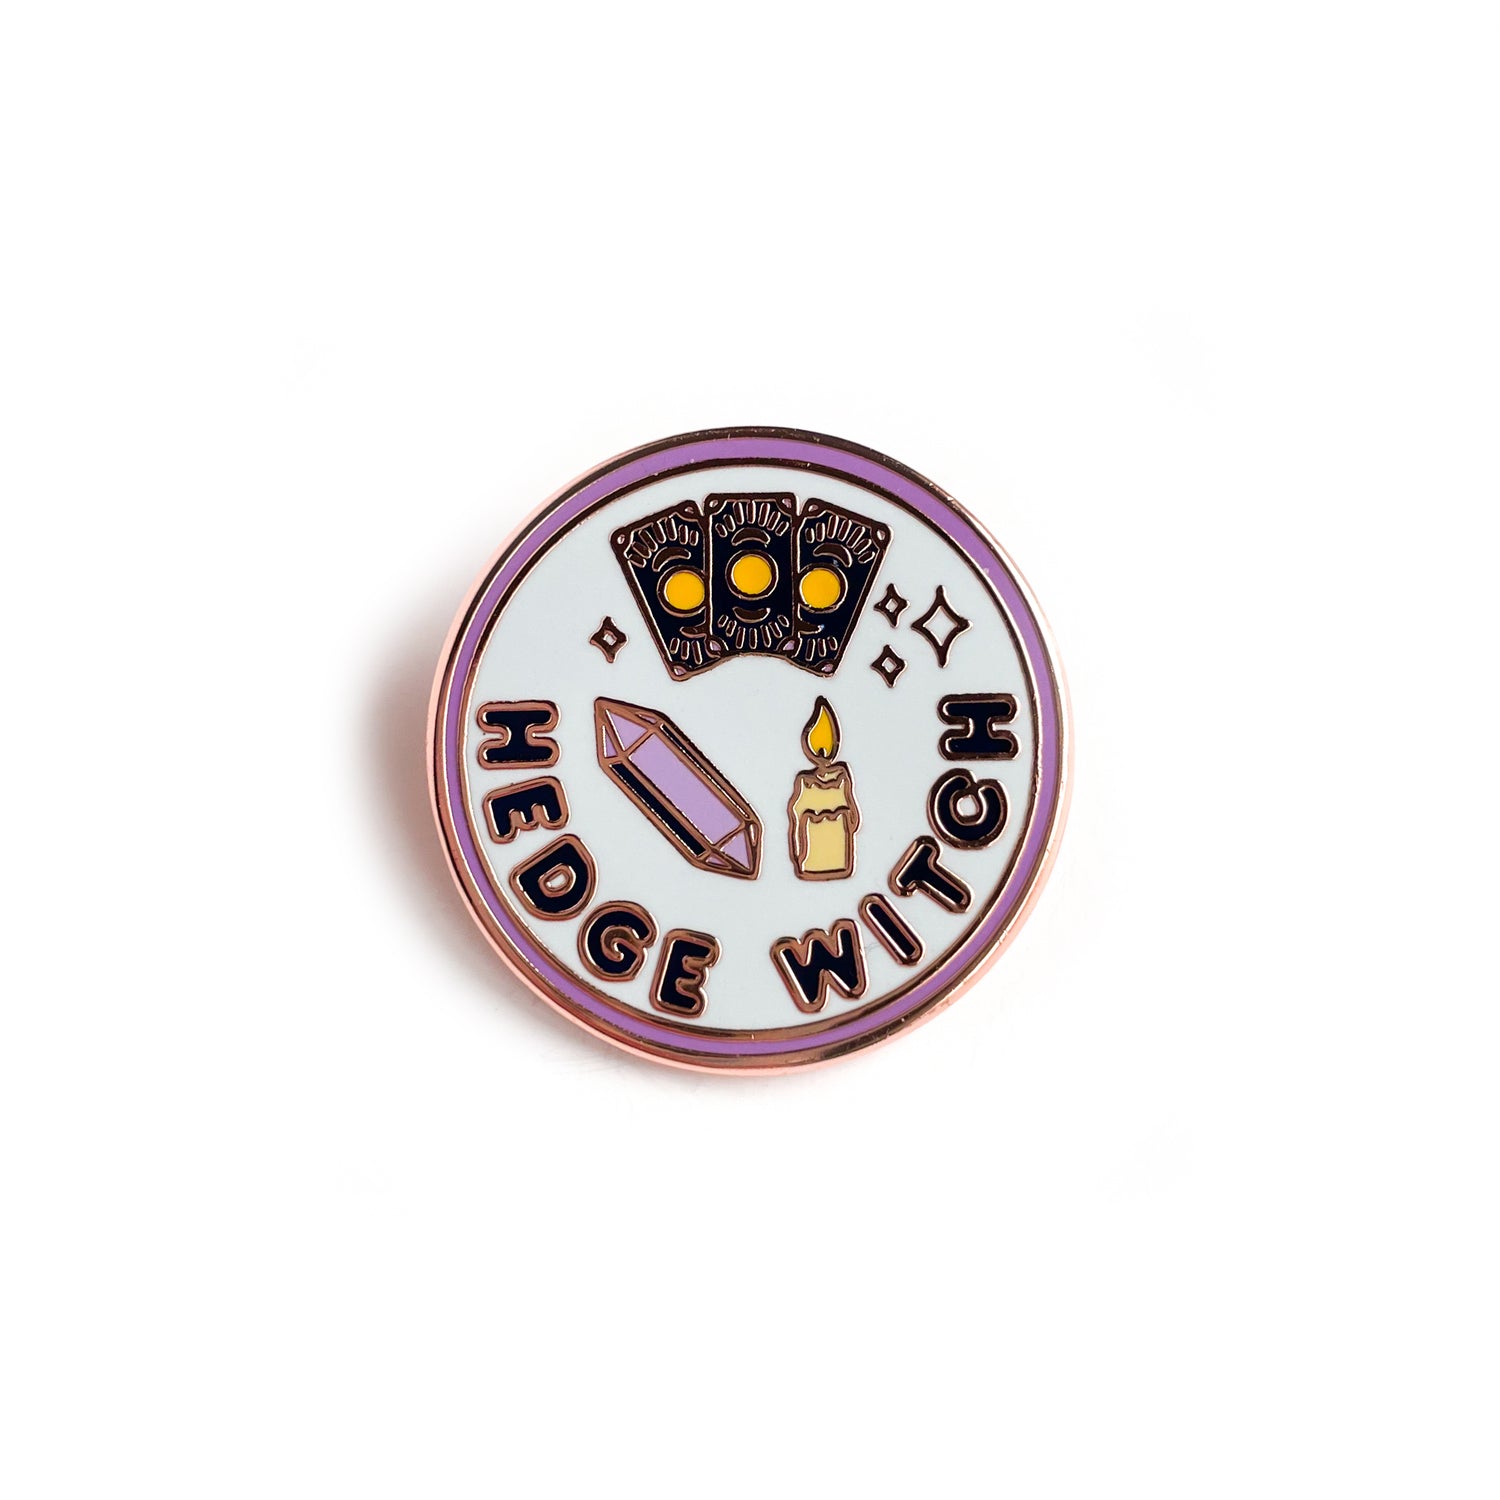 A circular enamel pin with a purple border, light blue background and dark purple words that read "Hedge Witch". There is an amethyst crystal, a candle, and three tarot cards depicted on it. 